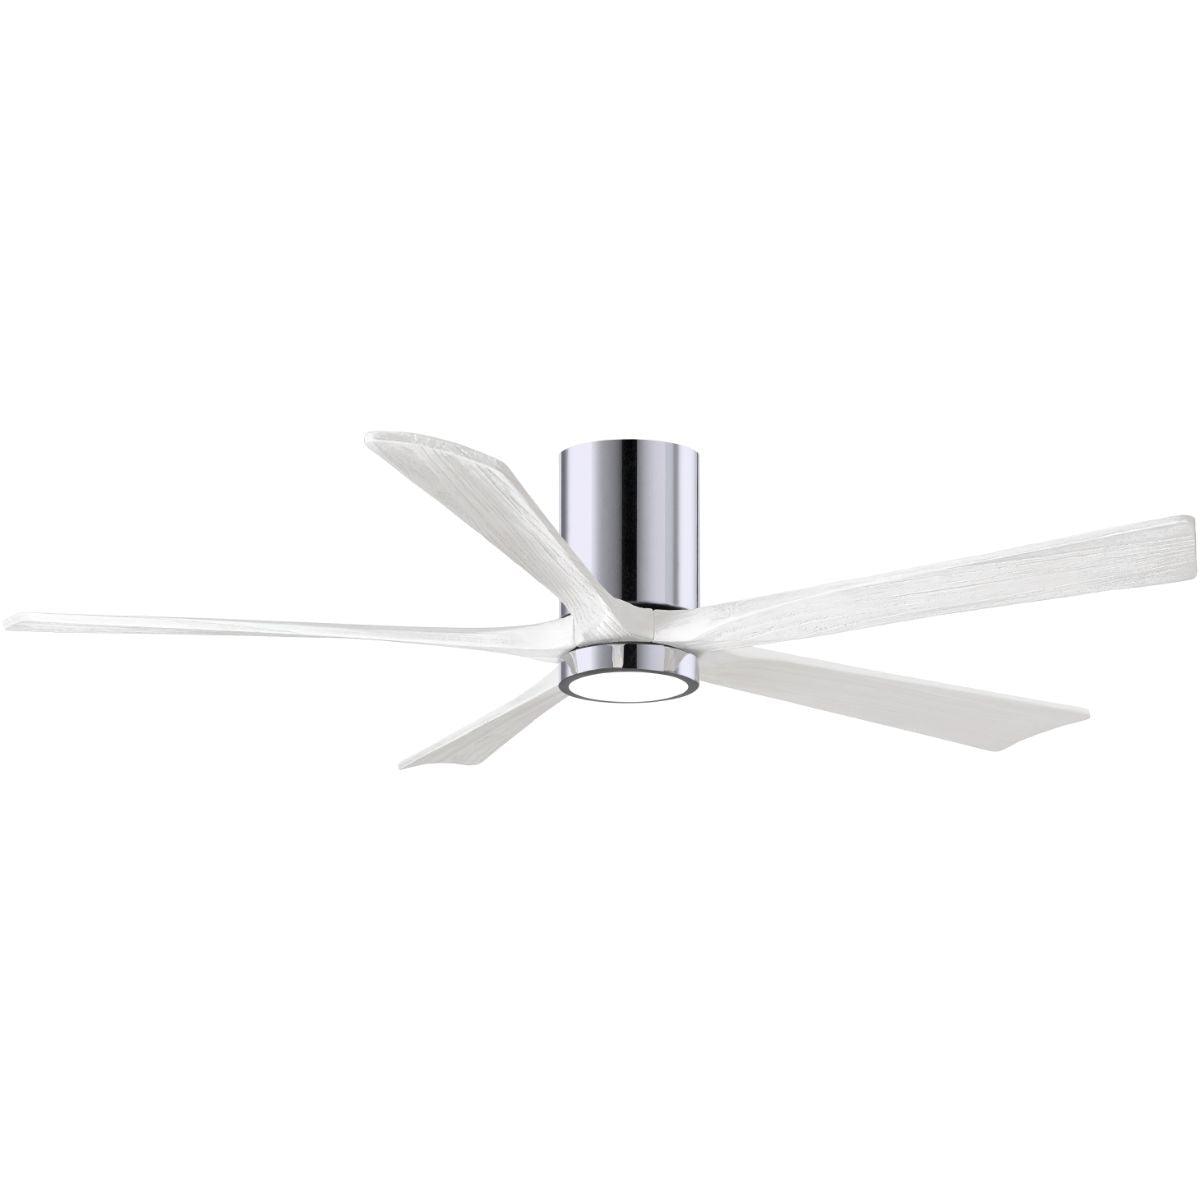 Irene 60 Inch Modern Outdoor Ceiling Fan With Light, Wall And Remote Control Included